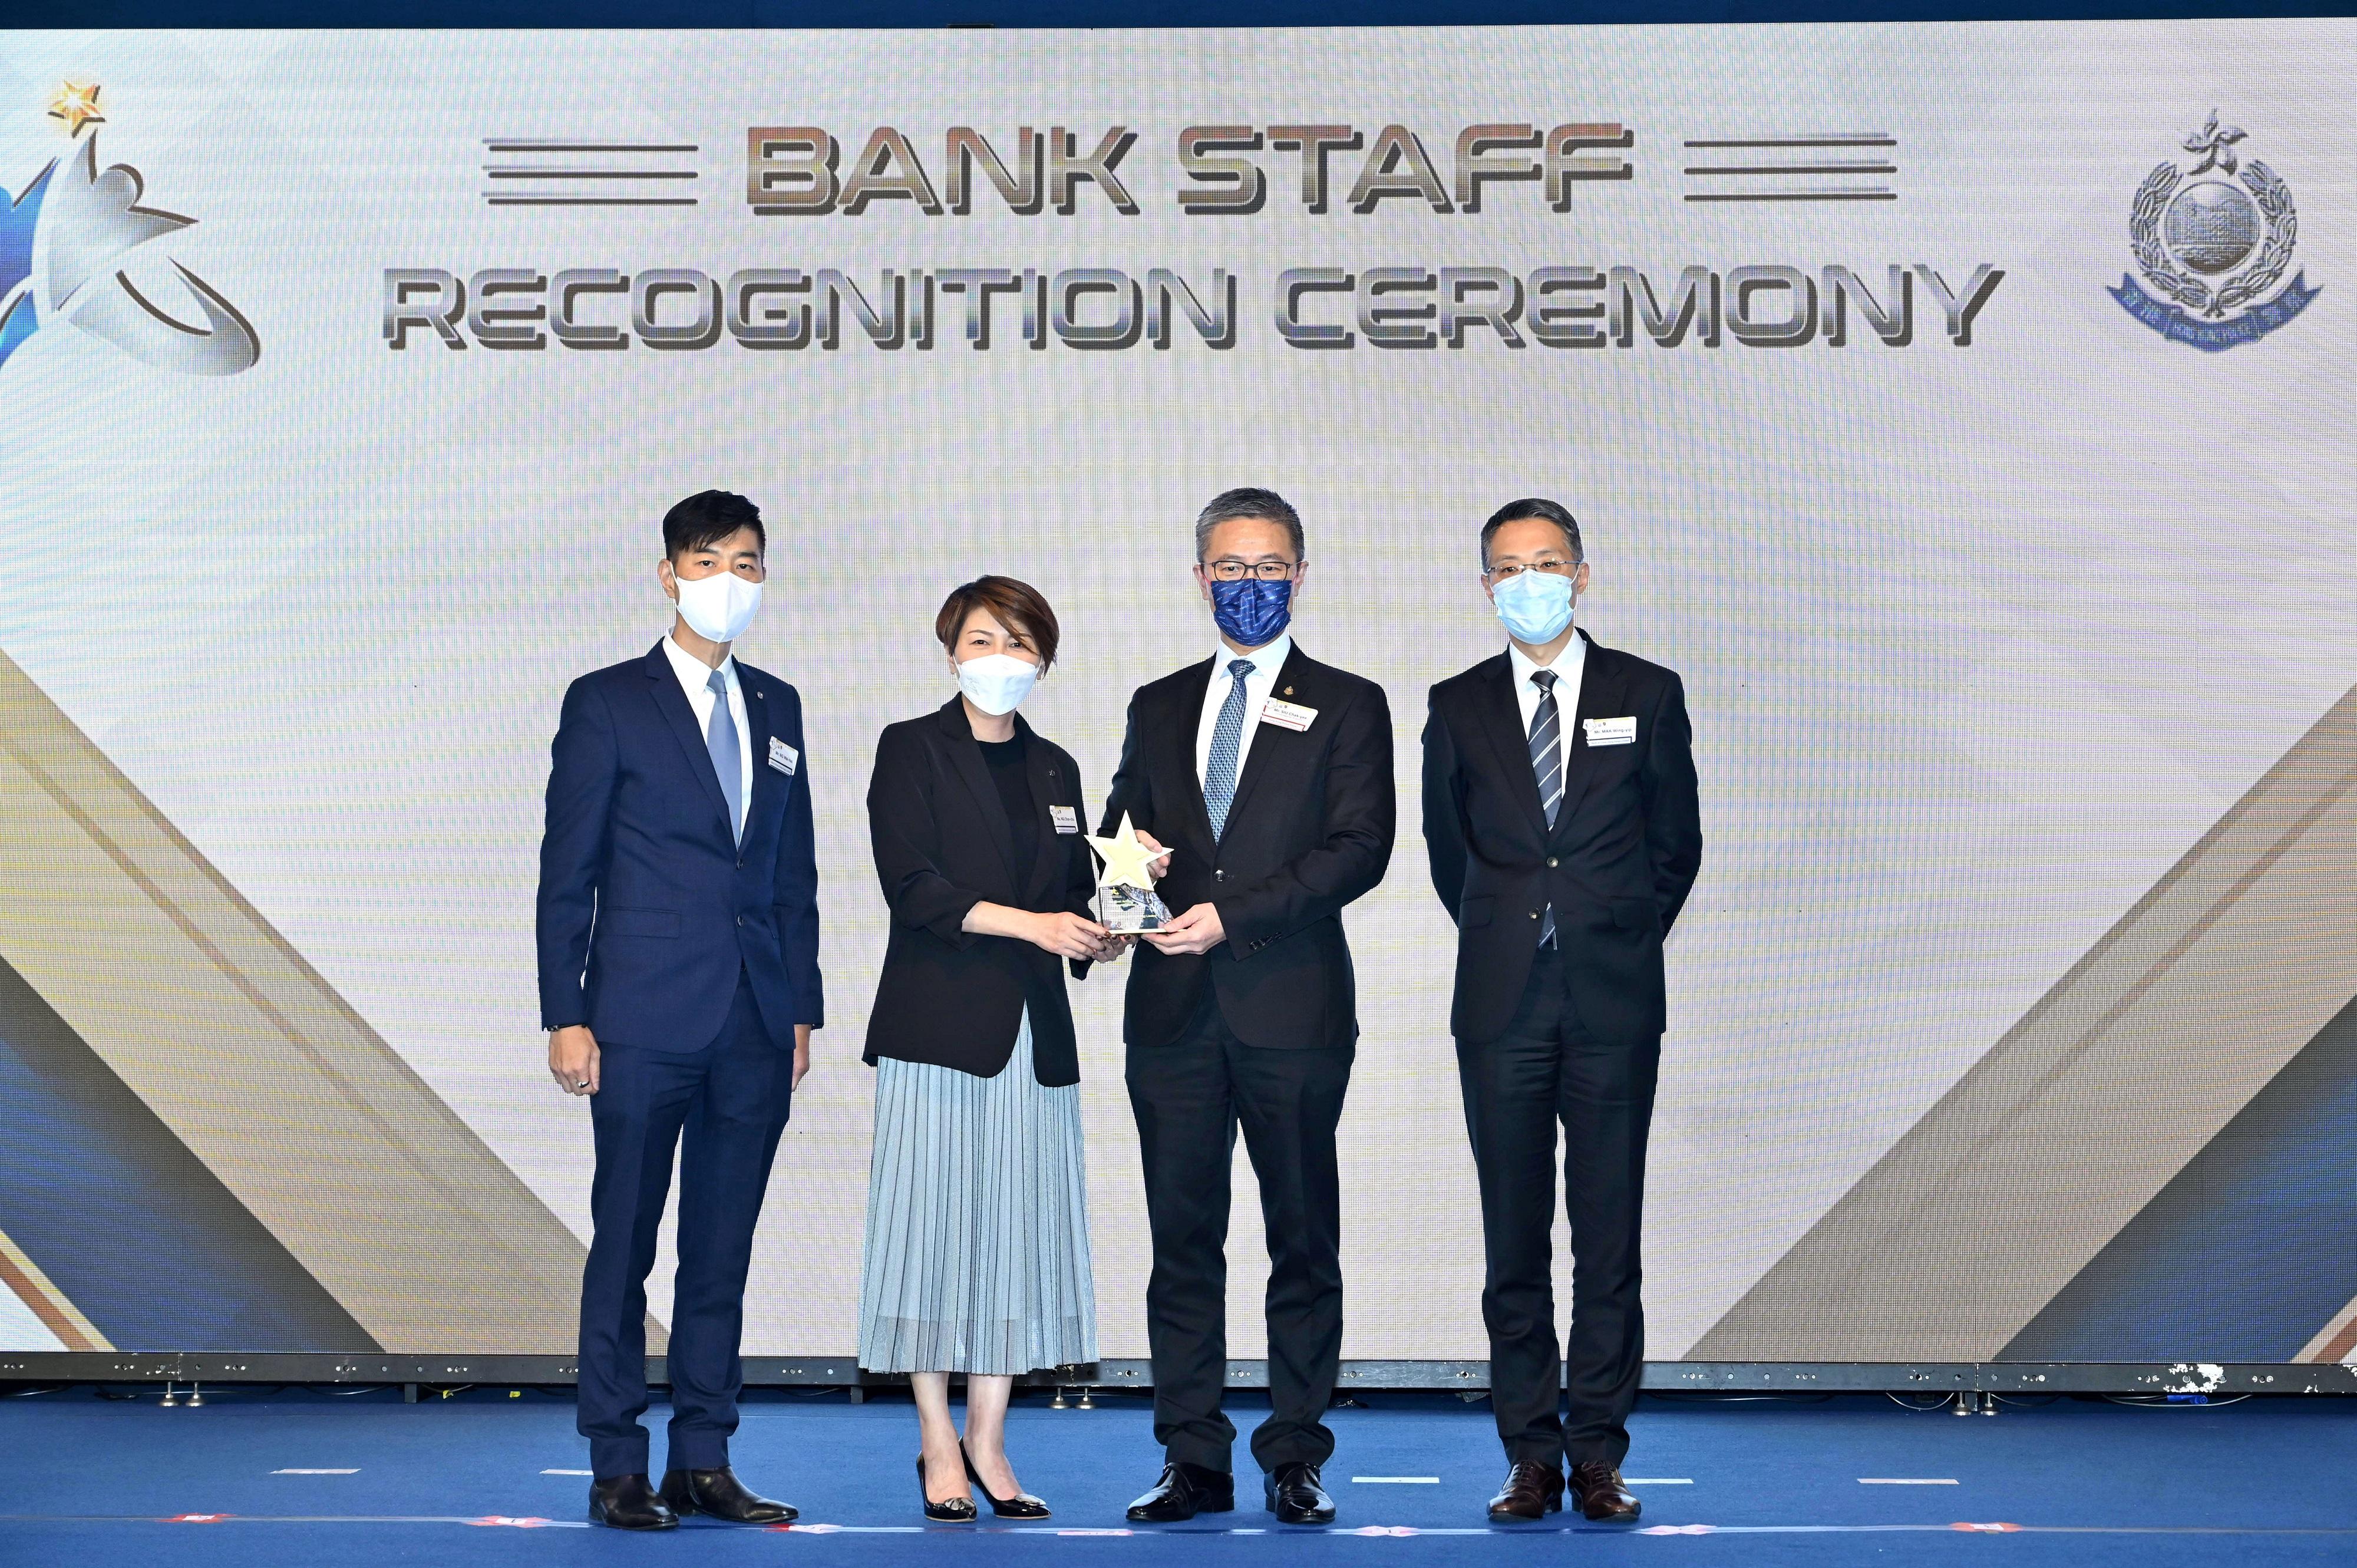 The Bank Staff Recognition Ceremony organised by the Hong Kong Police Force was held today (August 30). Photo shows the Commissioner of Police, Mr Siu Chak-yee (second right), presenting the Most Active Participation Award (Champion) to the bank representatives.  